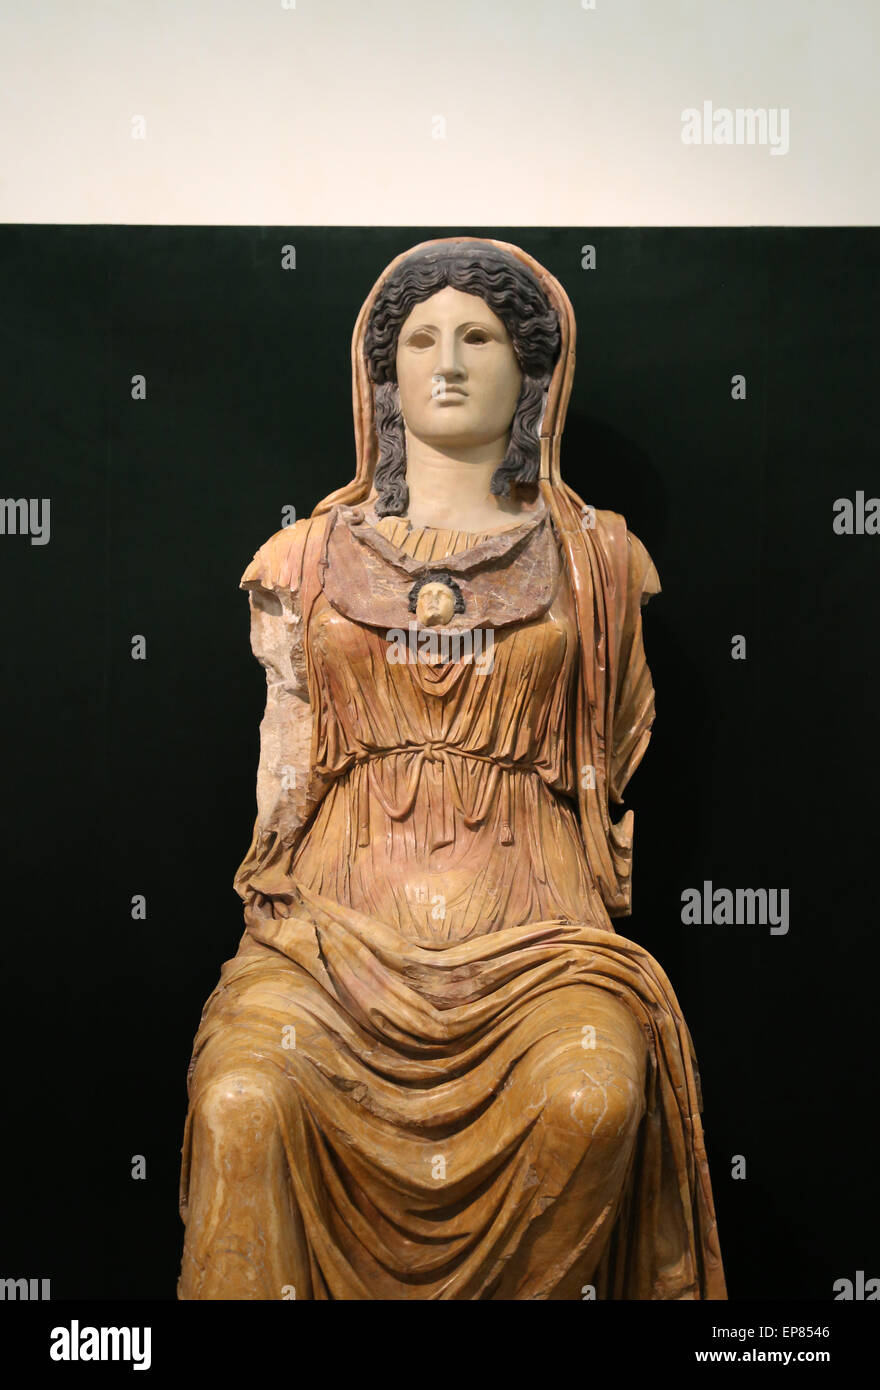 Statue of goddes Minerva. Dressed in a chiton and himation which covers her head. Roman. Augustan period. National Roman Museum. Stock Photo